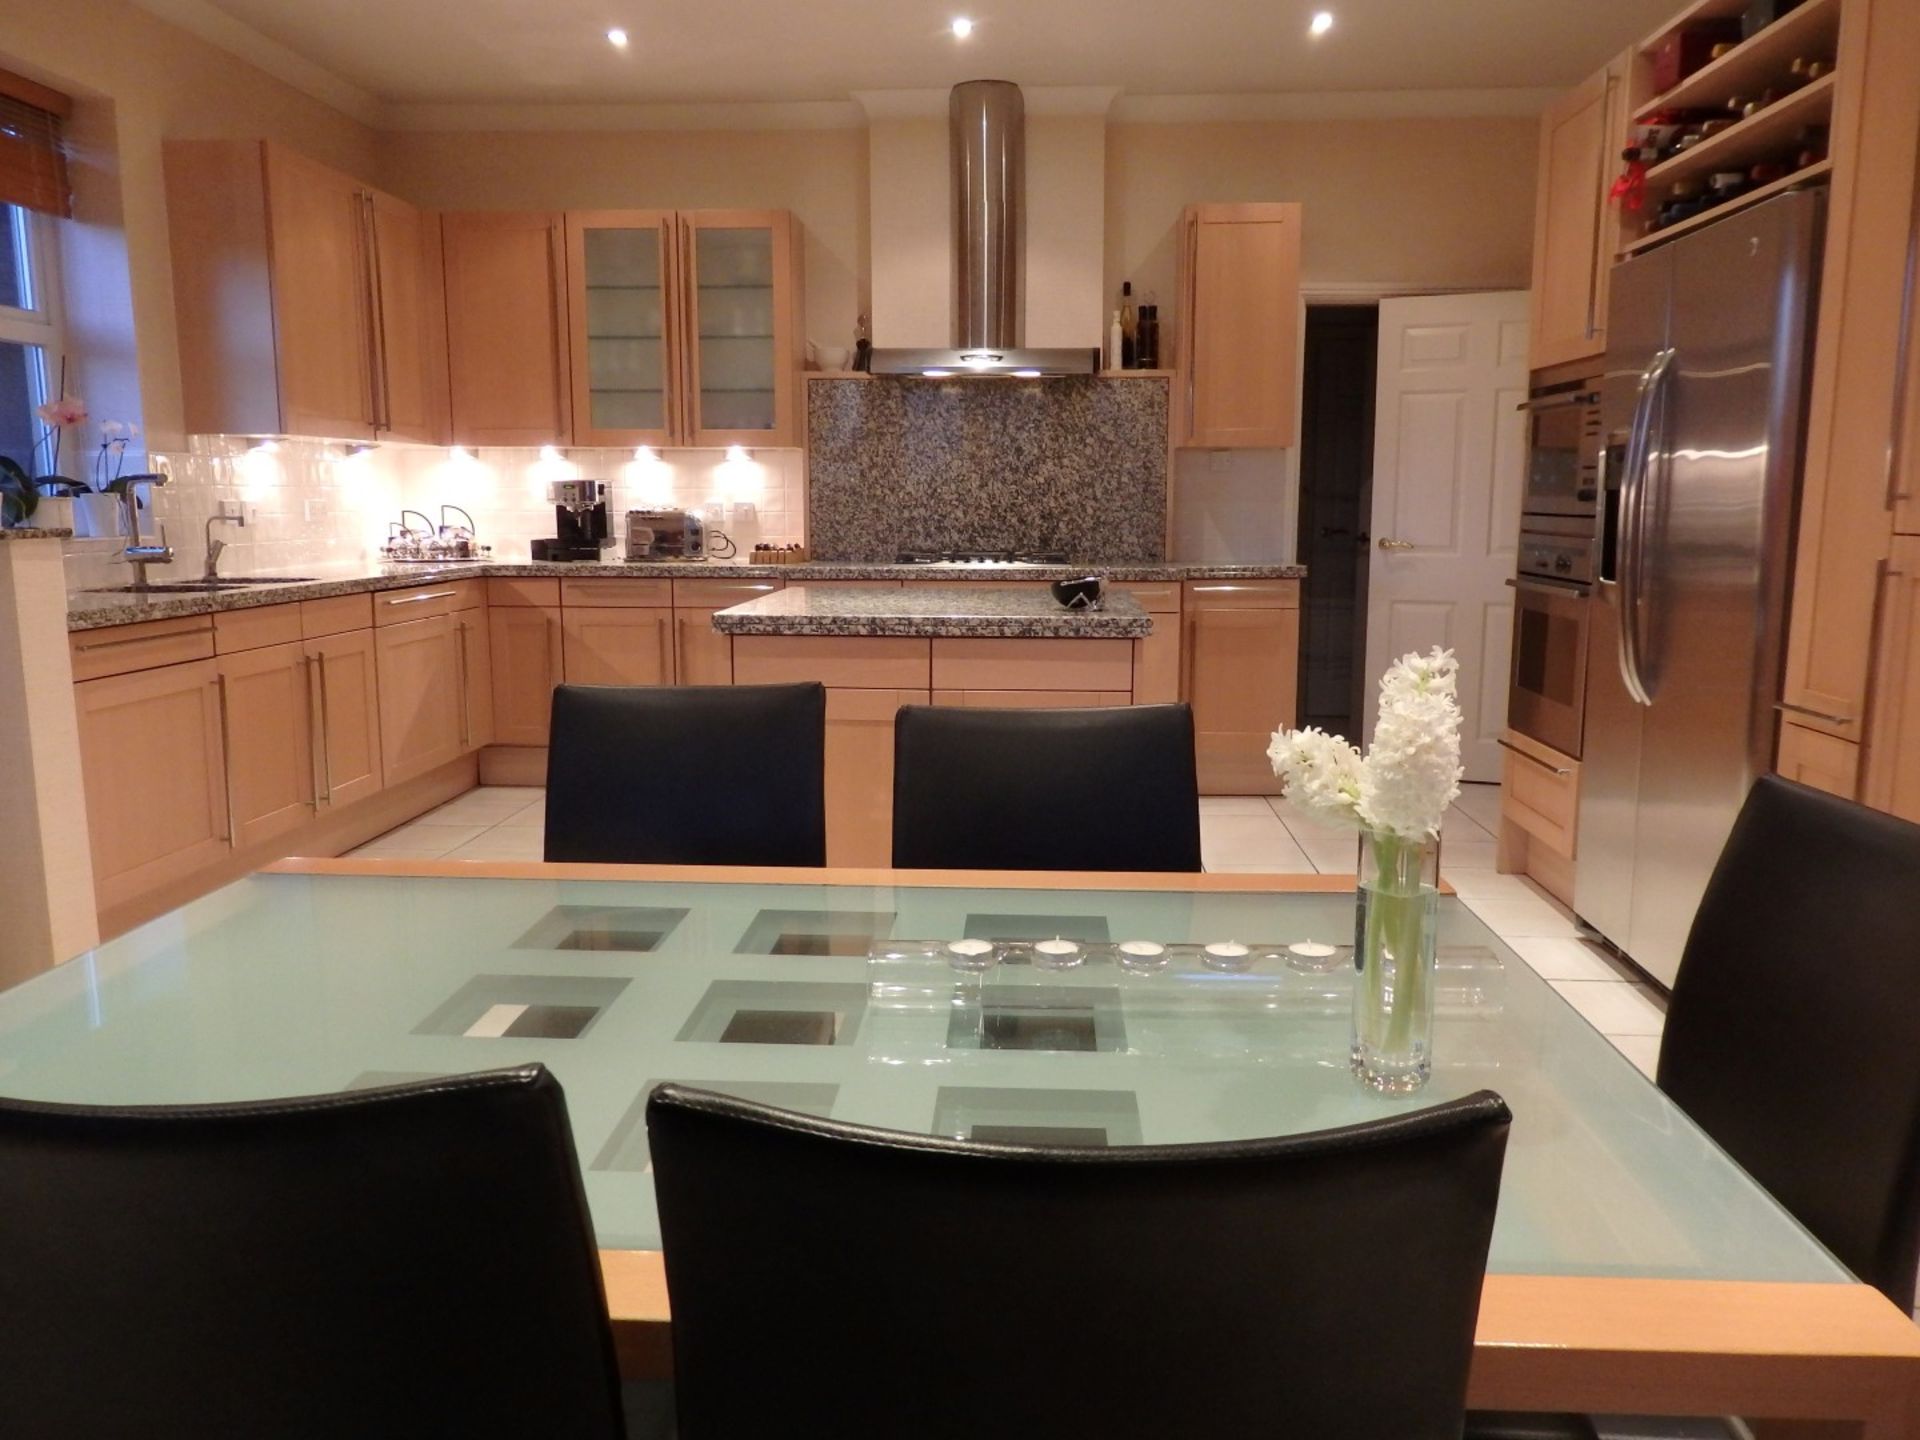 1 x Siematic Fitted Kitchen With Beech Shaker Style Doors, Granite Worktops, Central Island and - Image 13 of 148